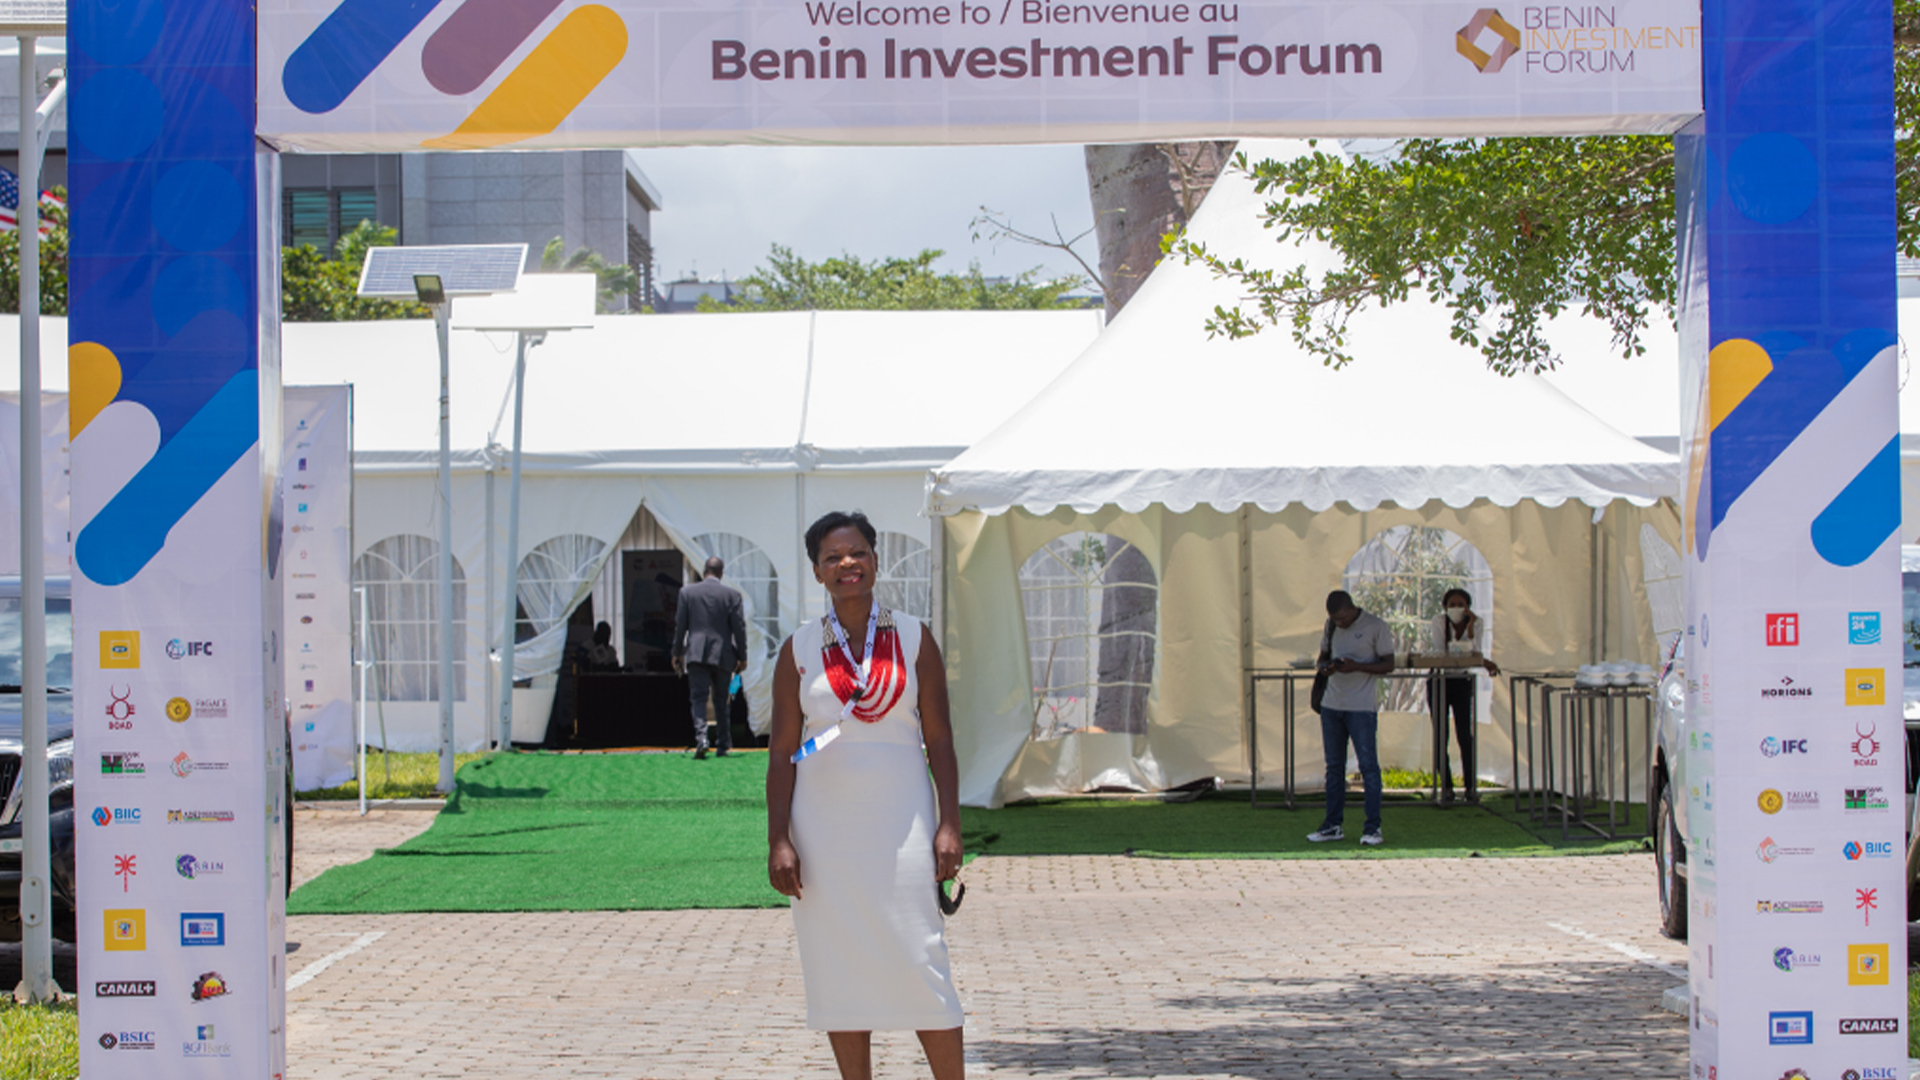 Mobilisation of the international economic and financial community around the needs of the Beninese economy: Benin Connect takes part in the Benin Investment Forum (BIF).